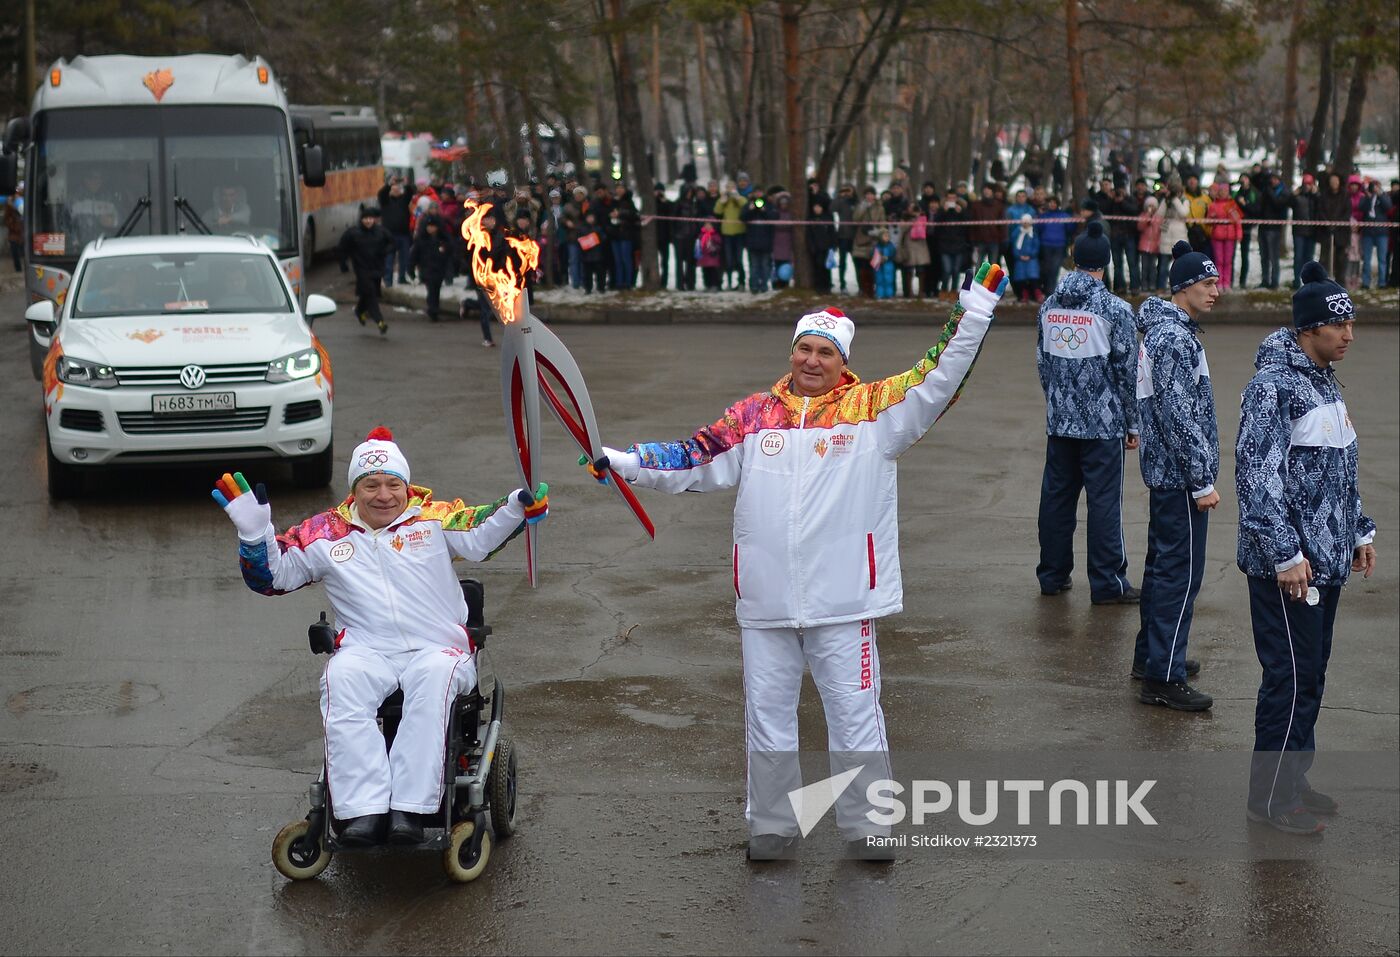 Olympic torch relay in Khabarovsk